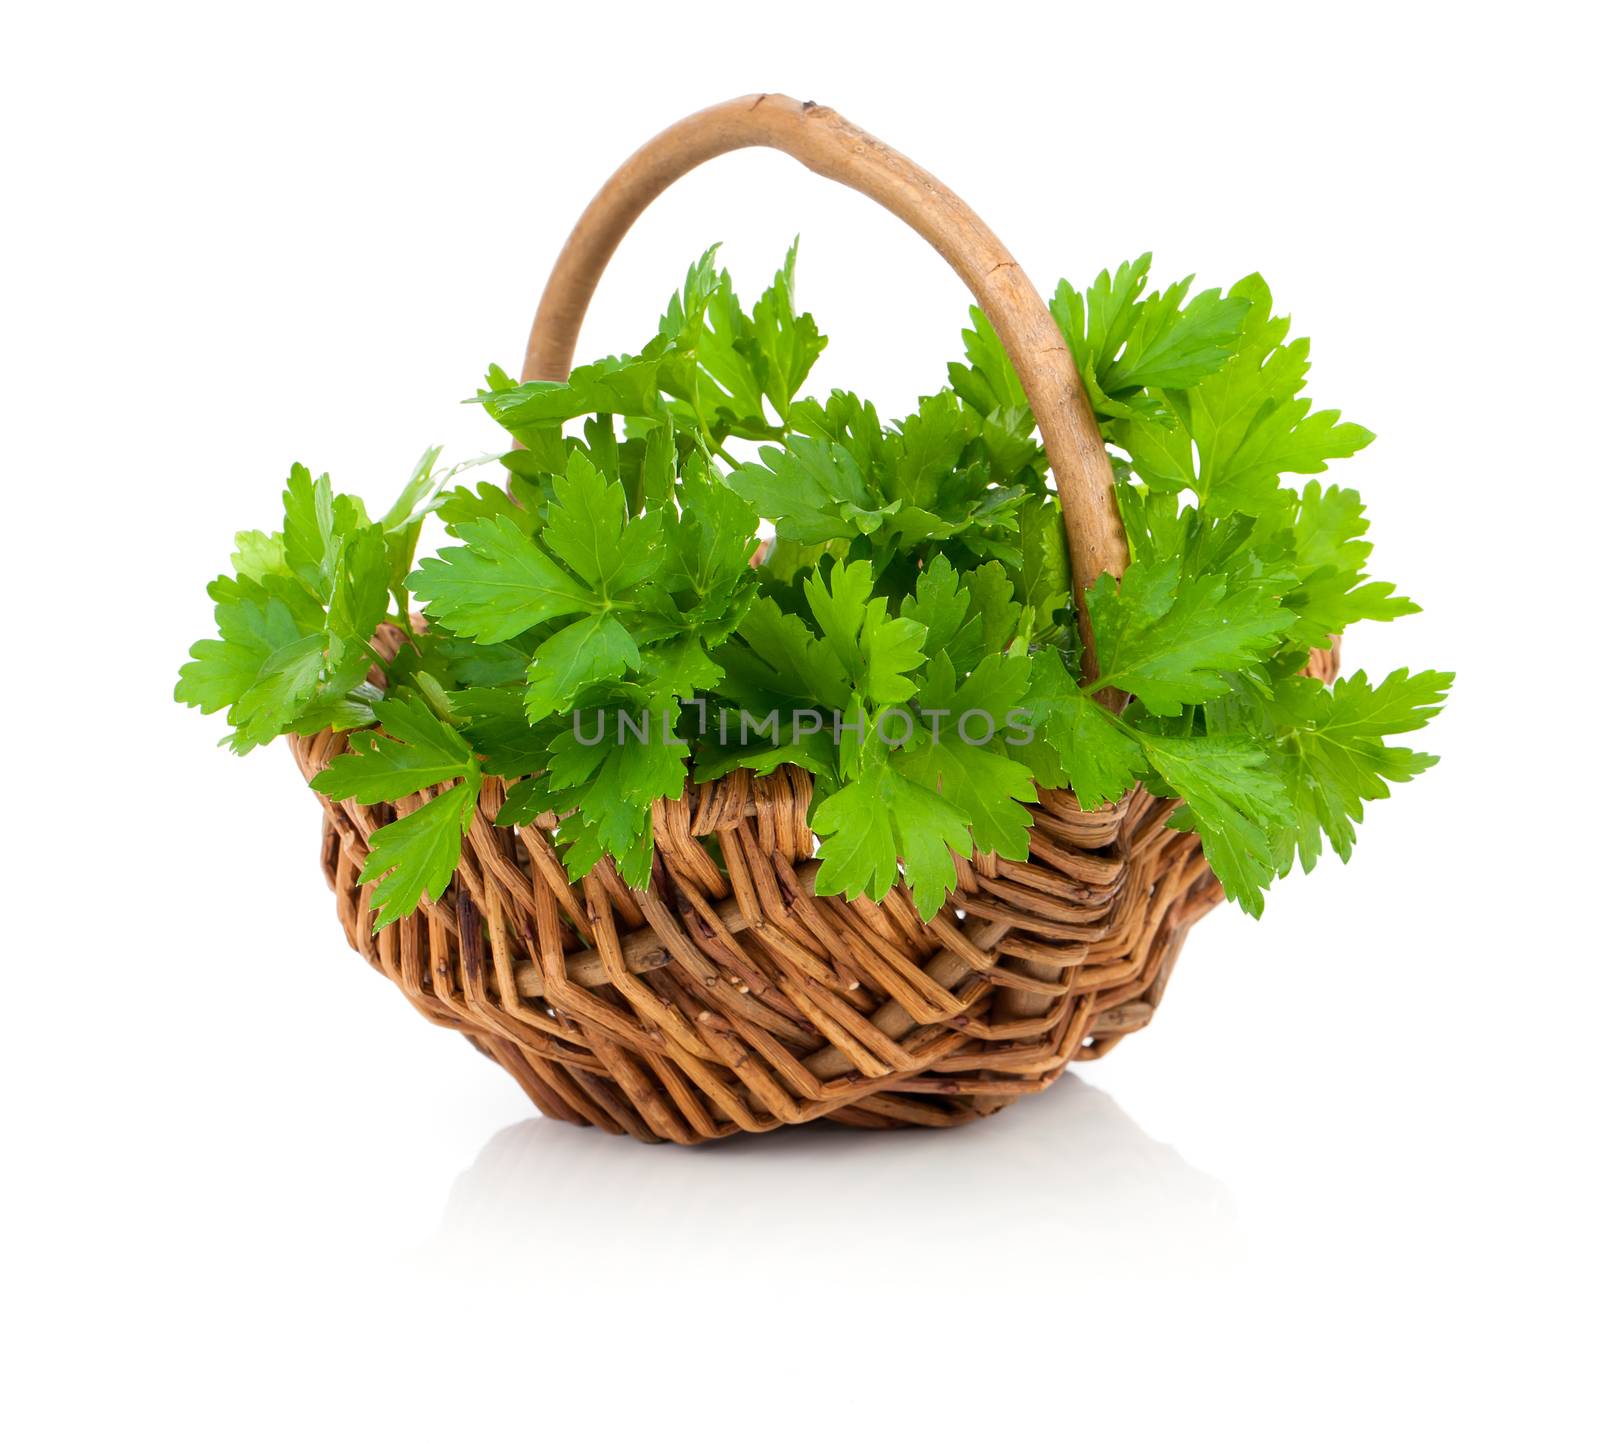 Bundle of fresh parsley in a wicker basket, on a white background